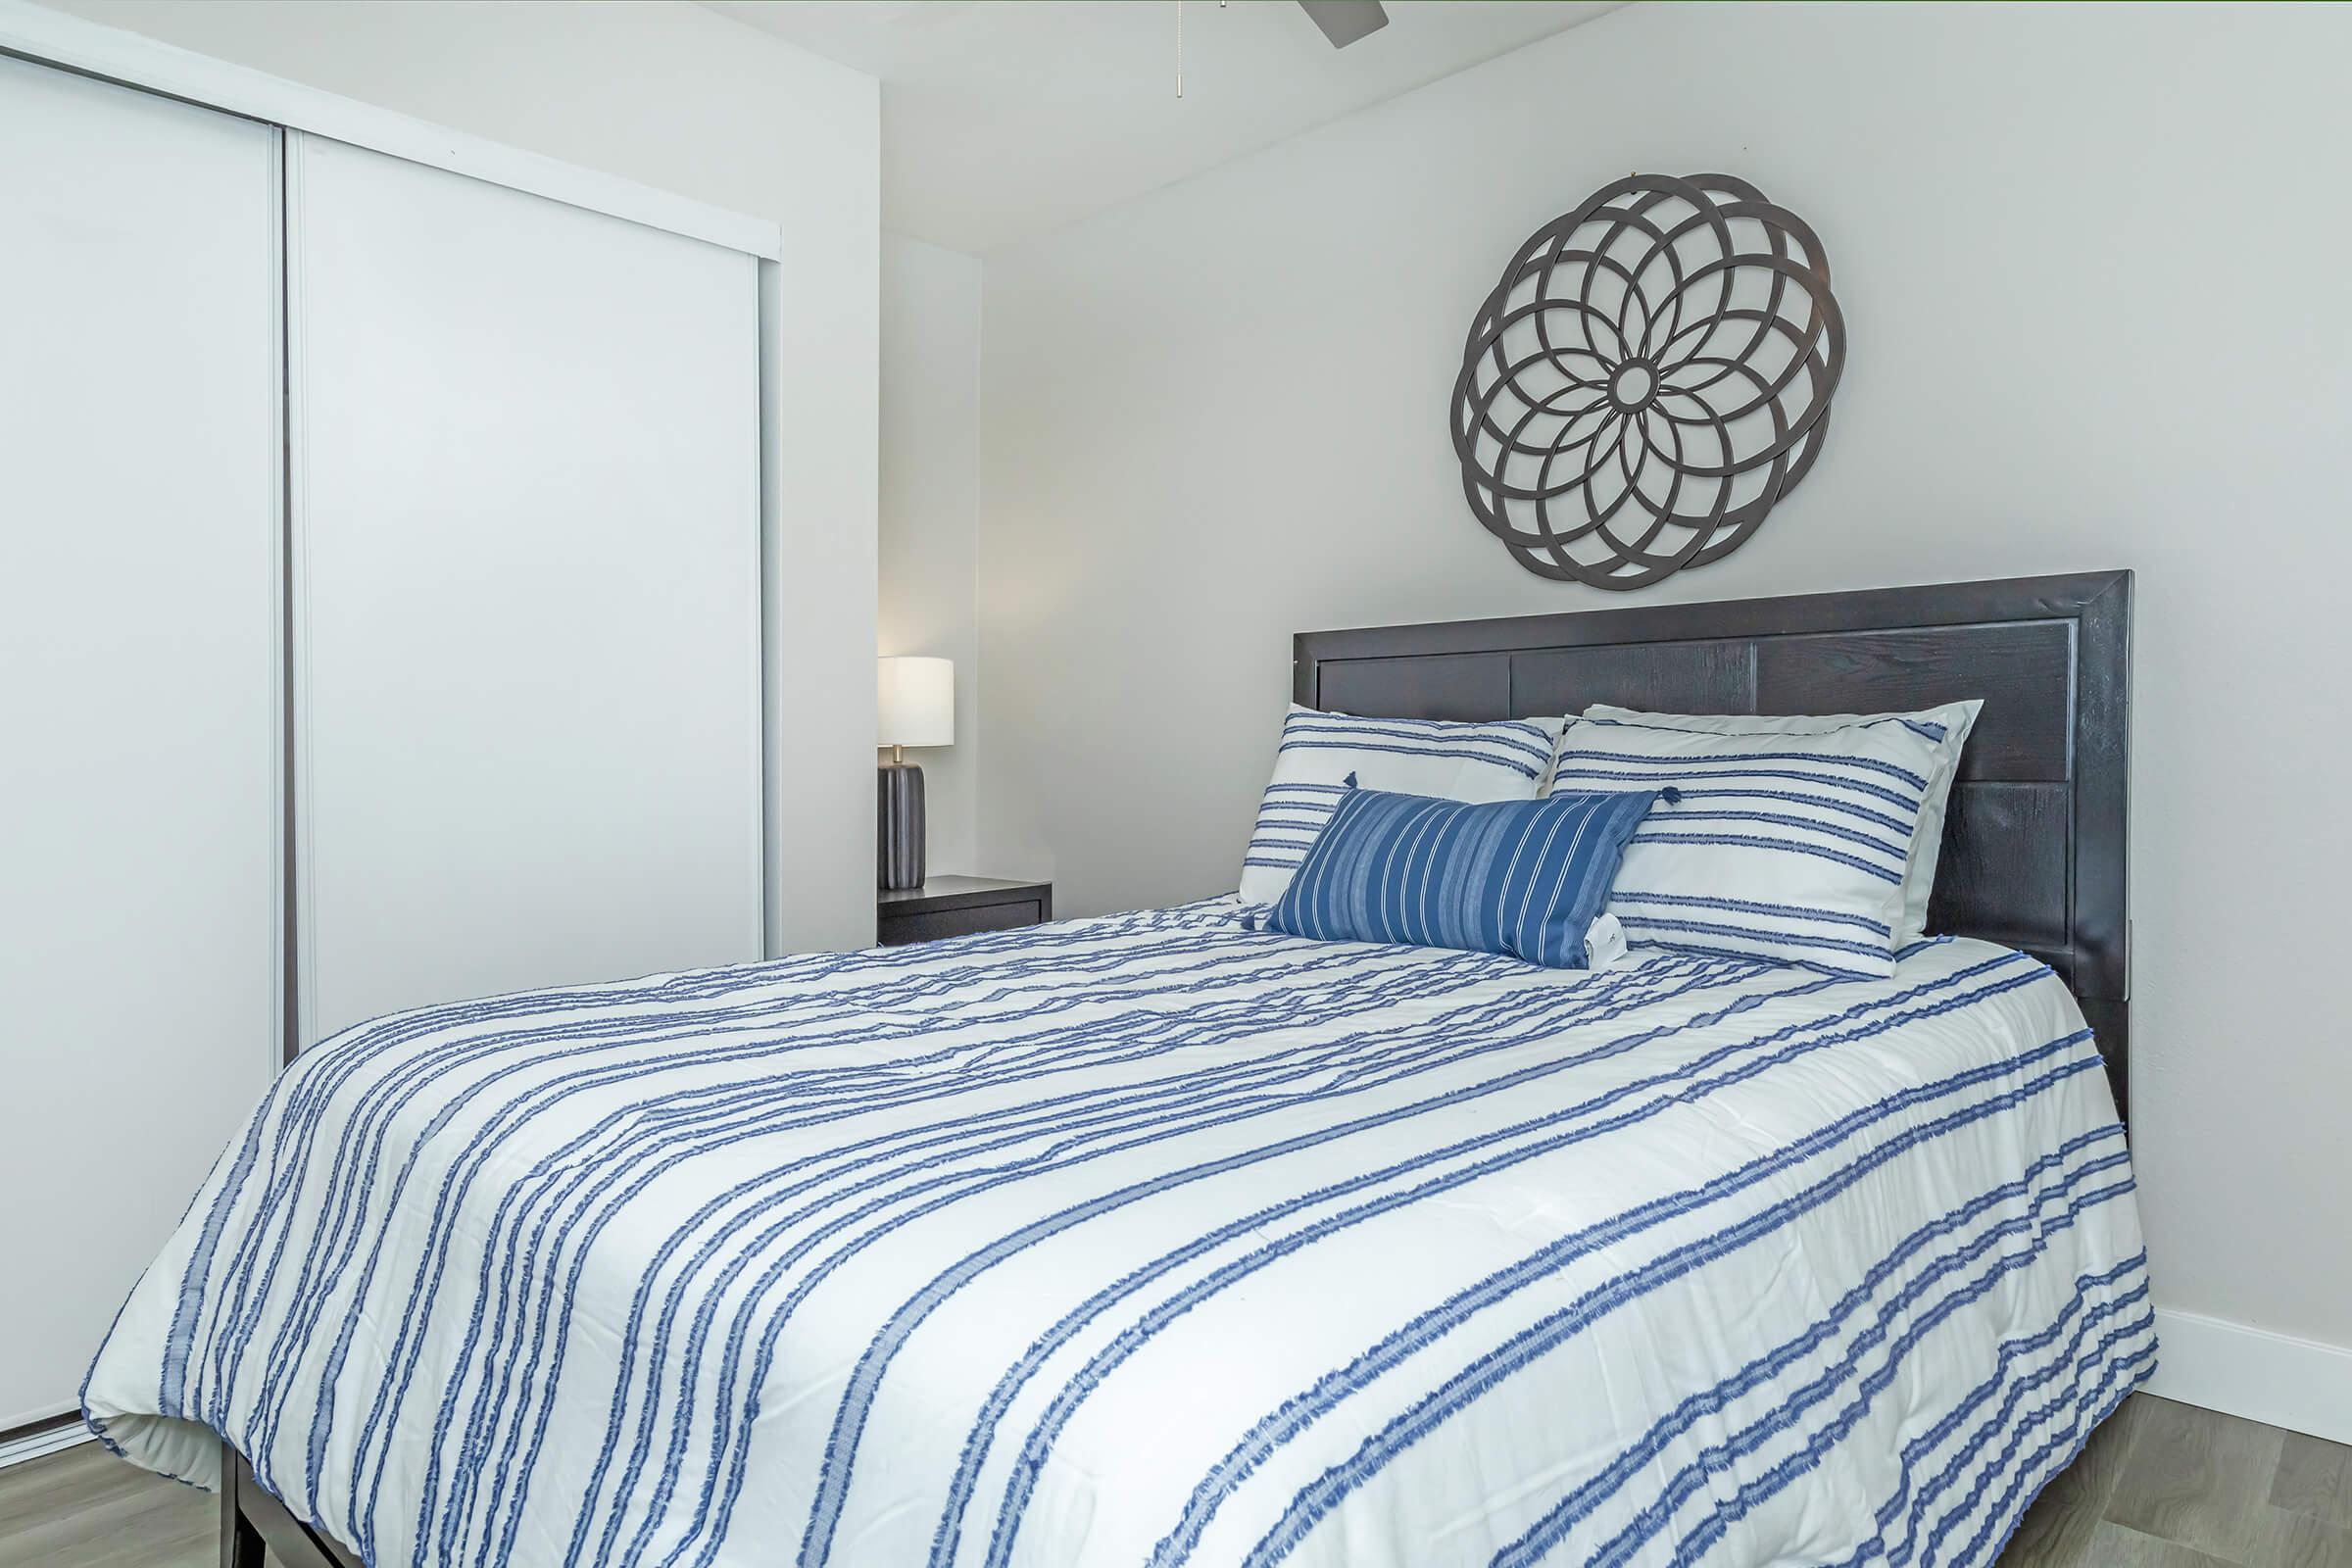 Two BR Luxury Apartments in Phoenix AZ - Tides on 71st - Bedroom with Closet and White Walls